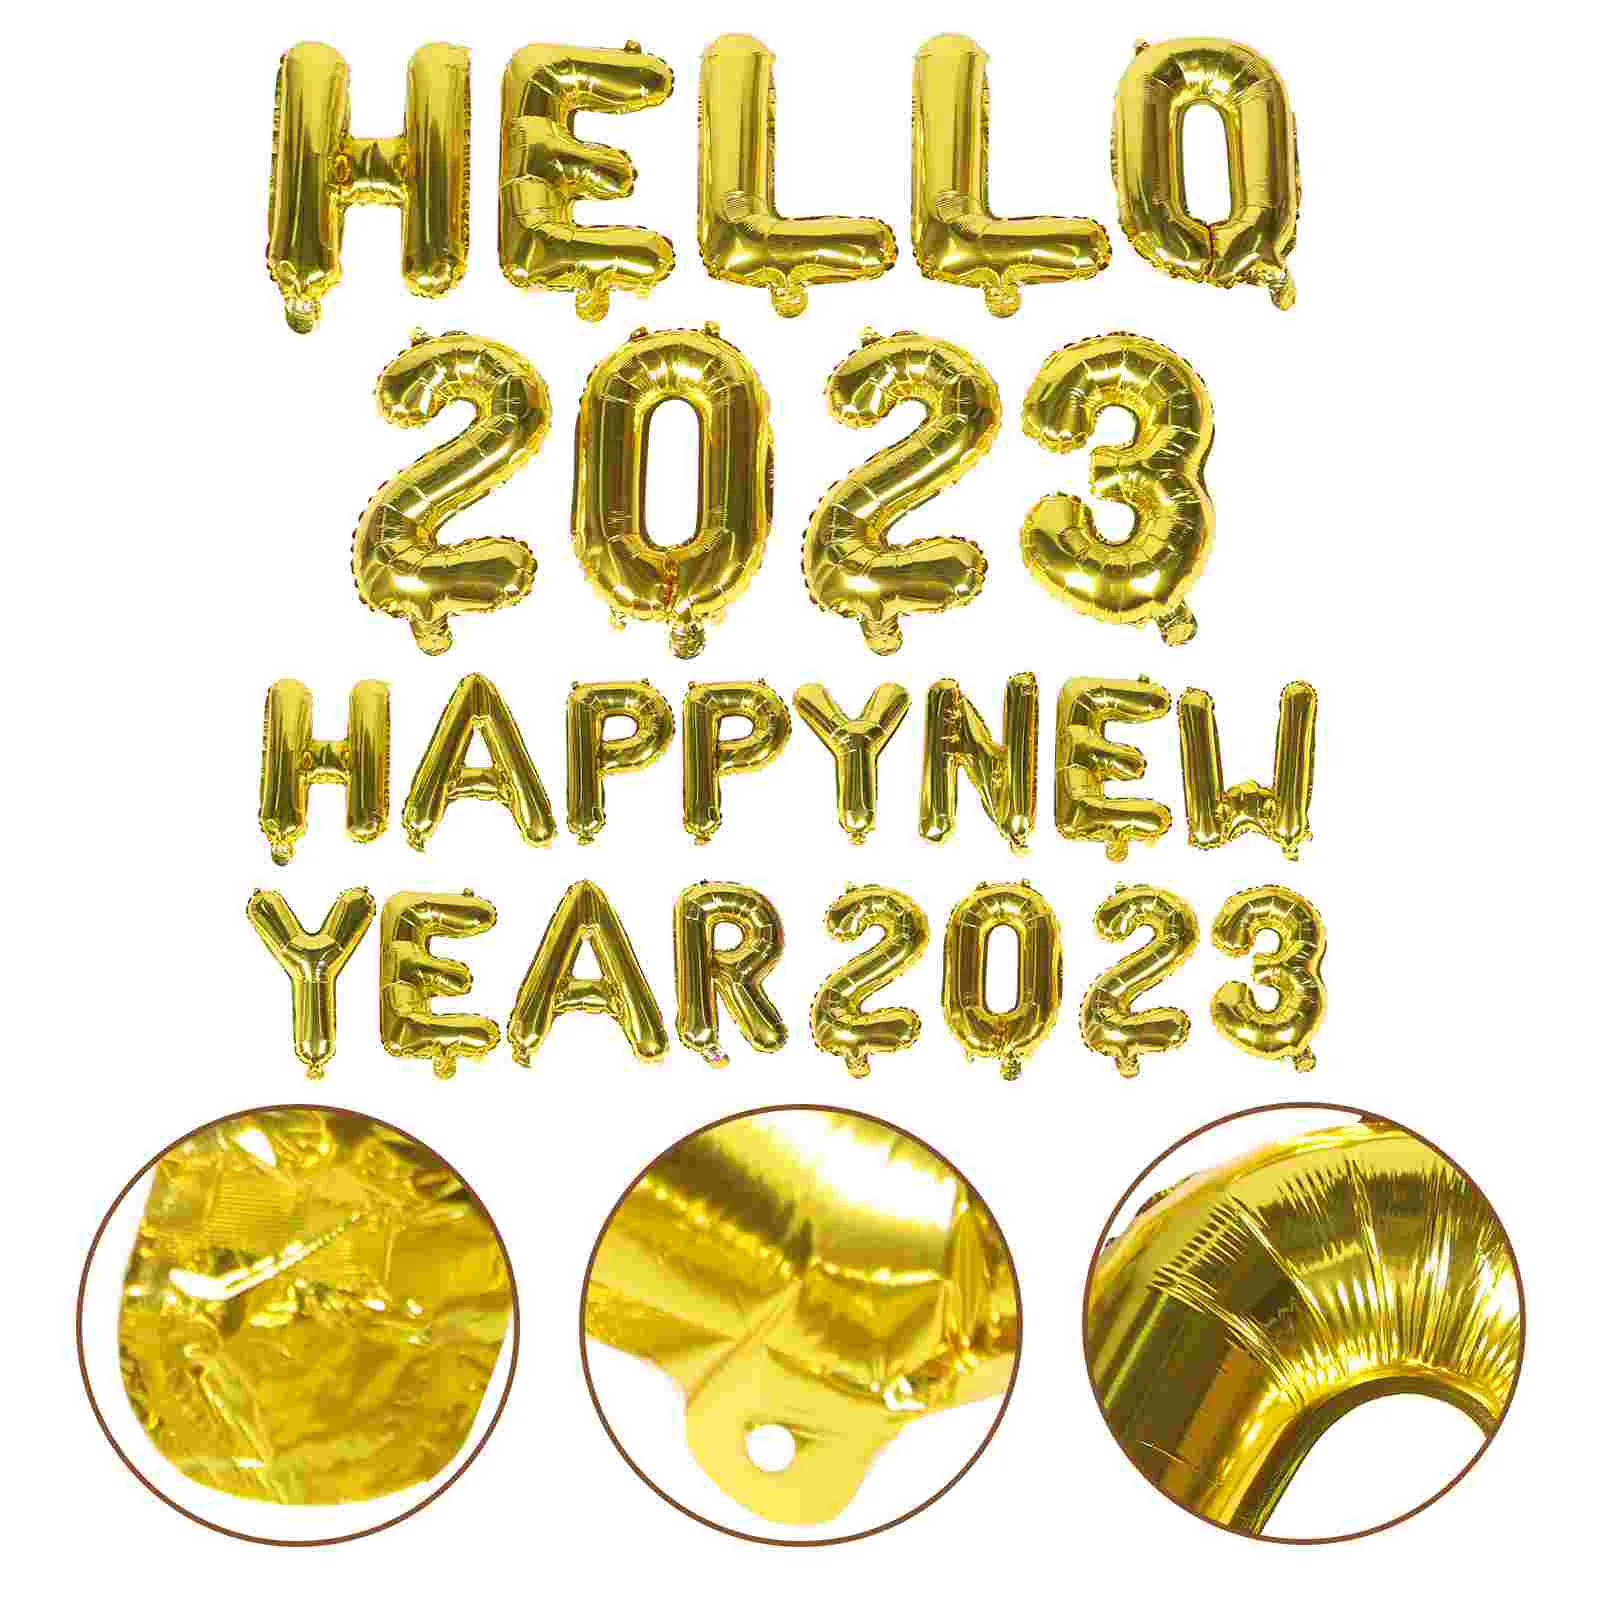 

Balloons New Year Party Eve Foil 2023 Supplies Happy Festival Decorations Letter Balloon Favors Layout Aluminum Ornaments